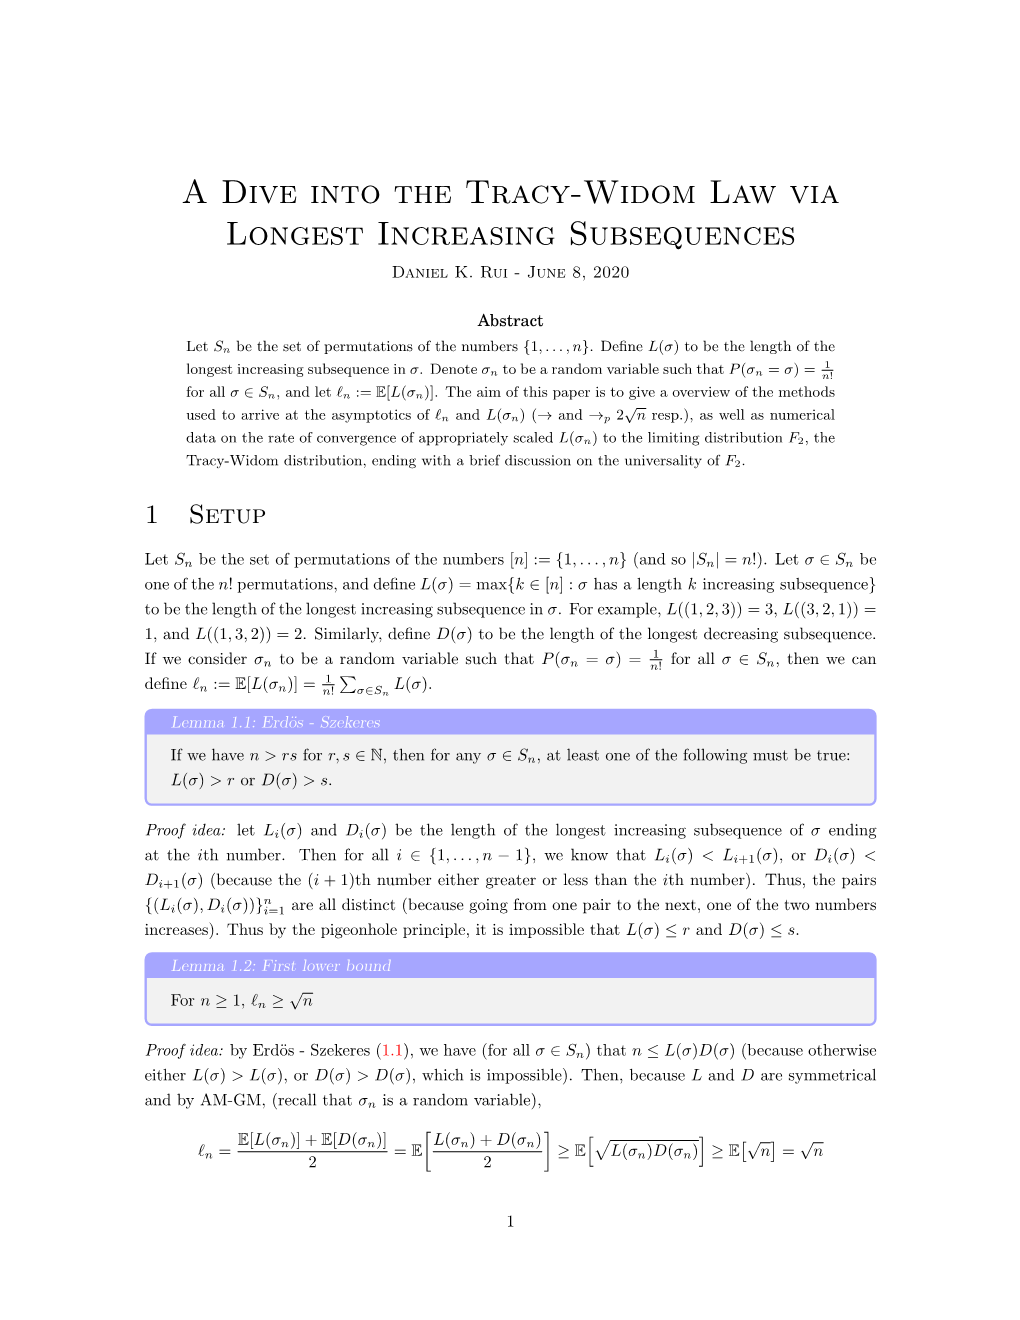 A Dive Into the Tracy-Widom Law Via Longest Increasing Subsequences Daniel K